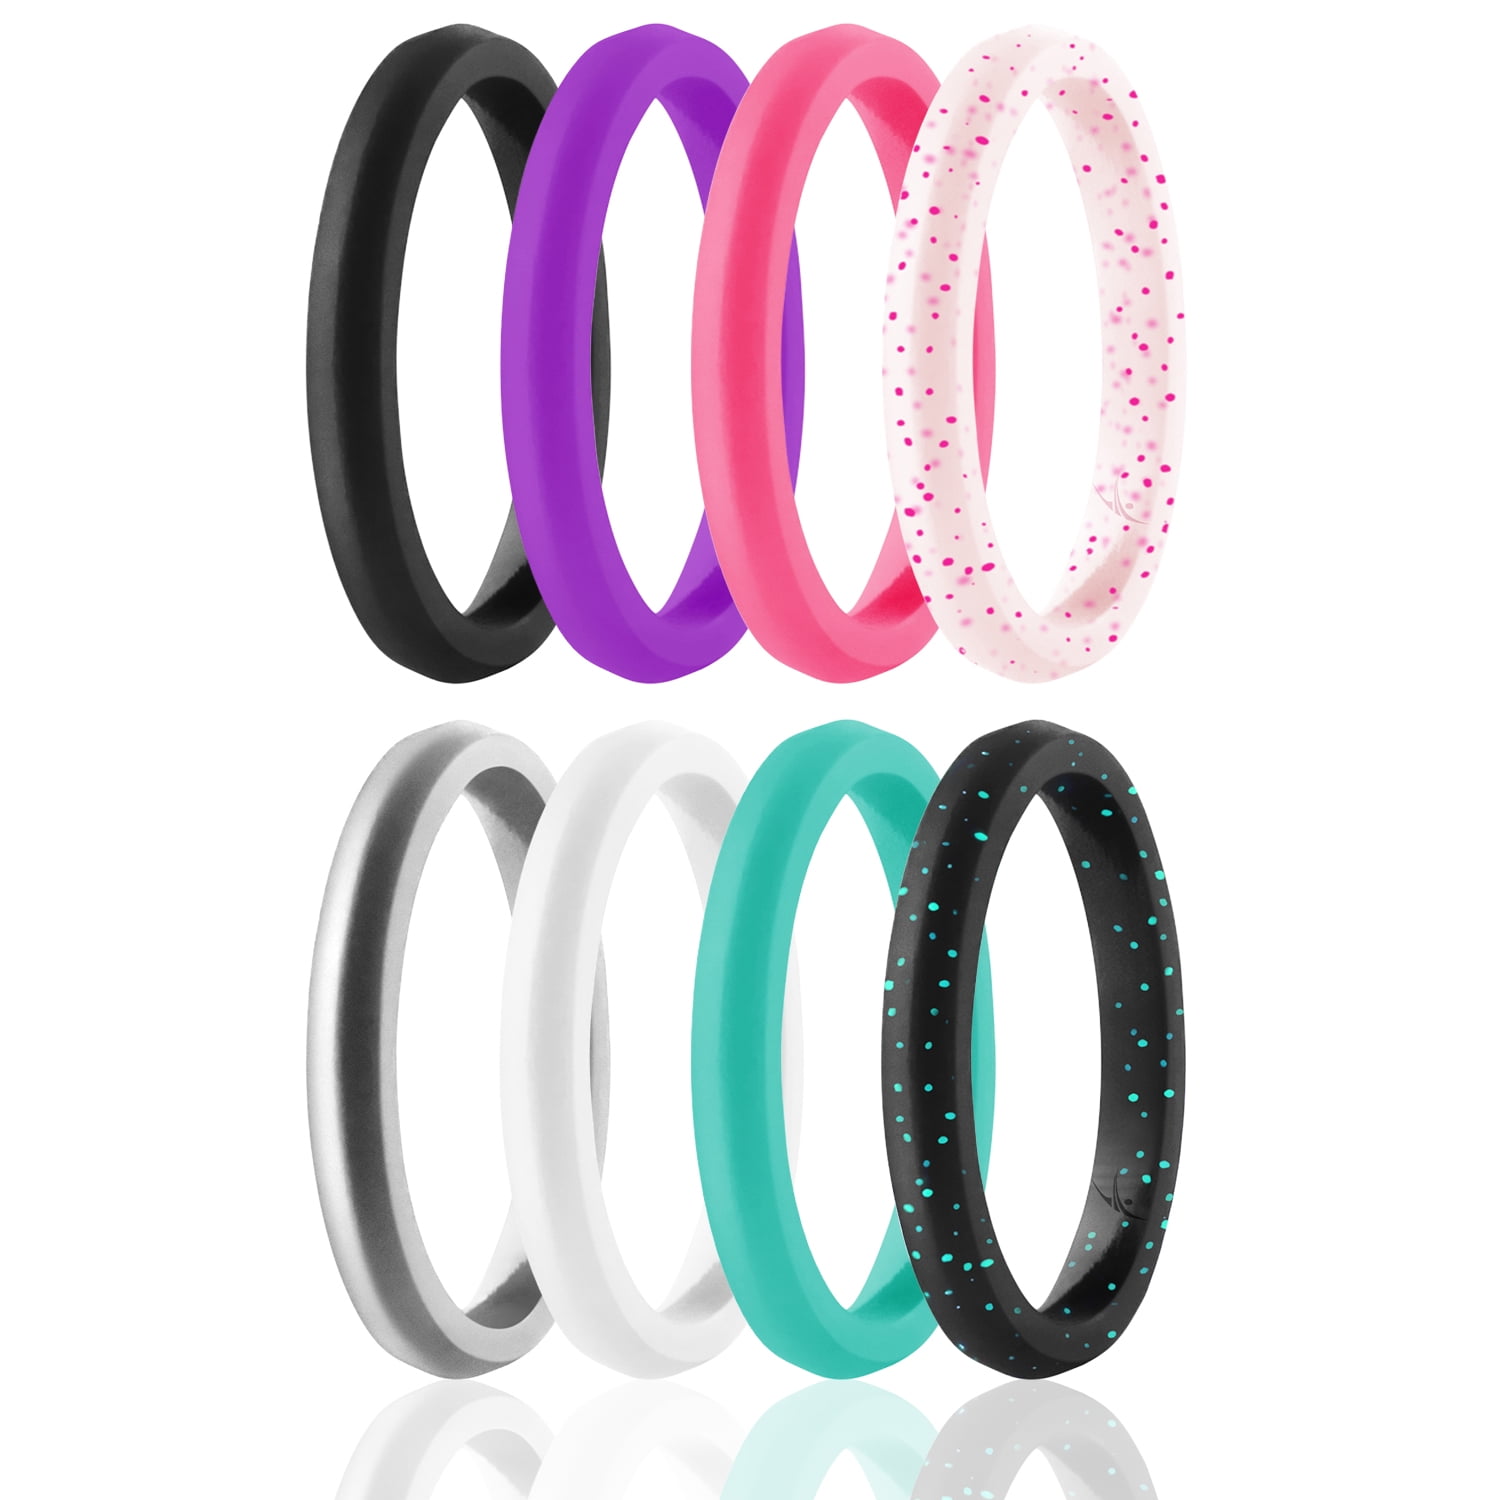 Beilove Silicone Wedding Ring for Women,Singles & 6 Pack,Black,Turquoise,Pink,White,Glitters